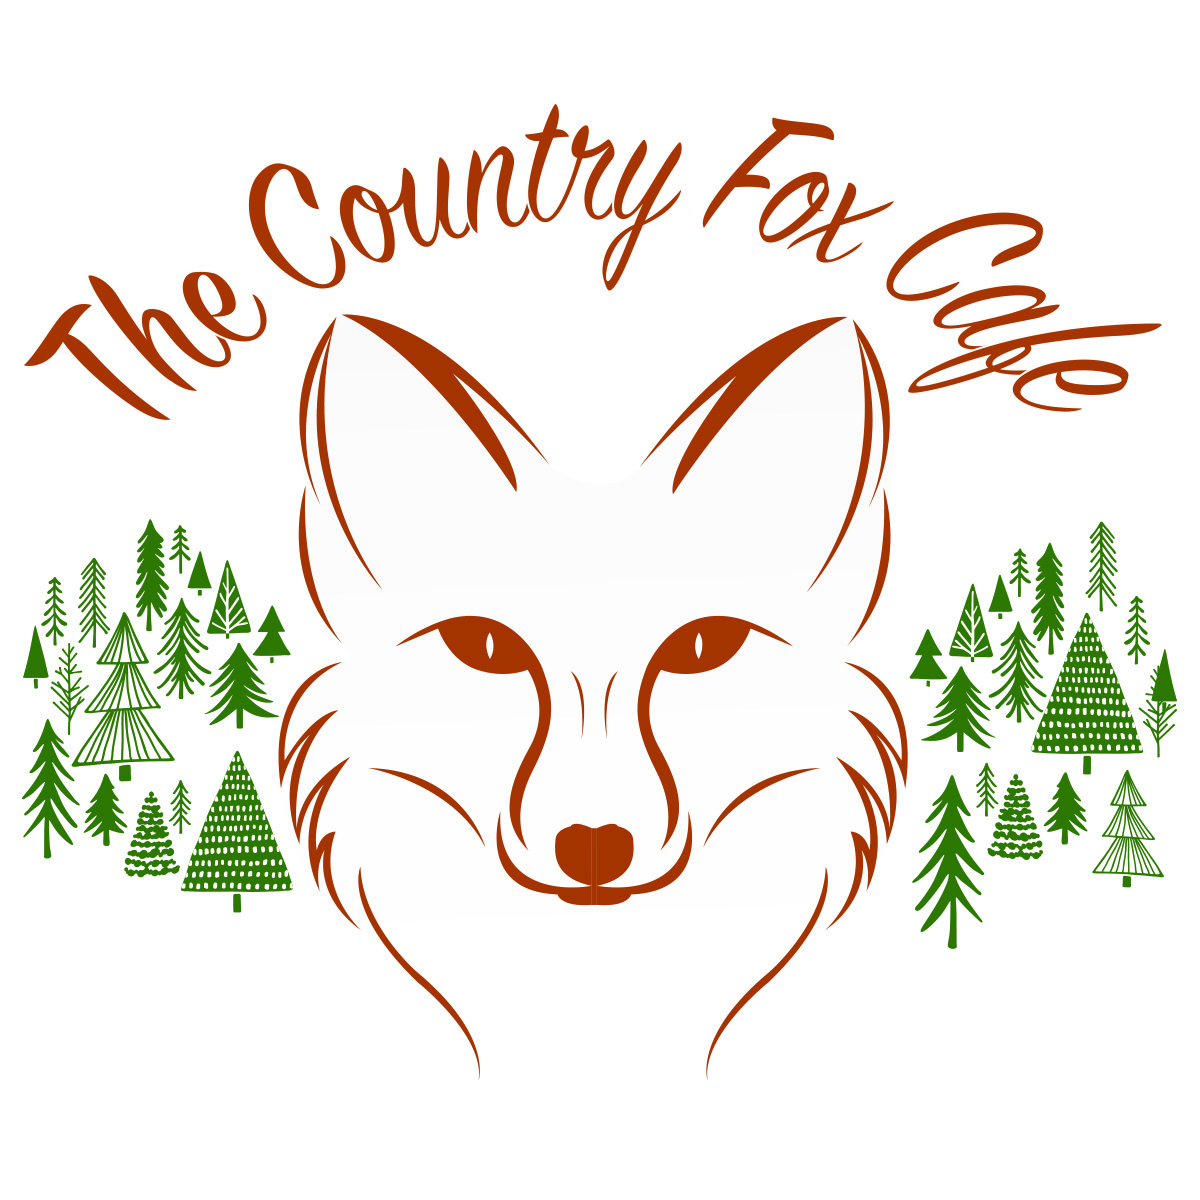 A logo for "the Country Fox Cafe" featuring an outline drawing of a fox head in orange with various rustic looking tree drawing around it